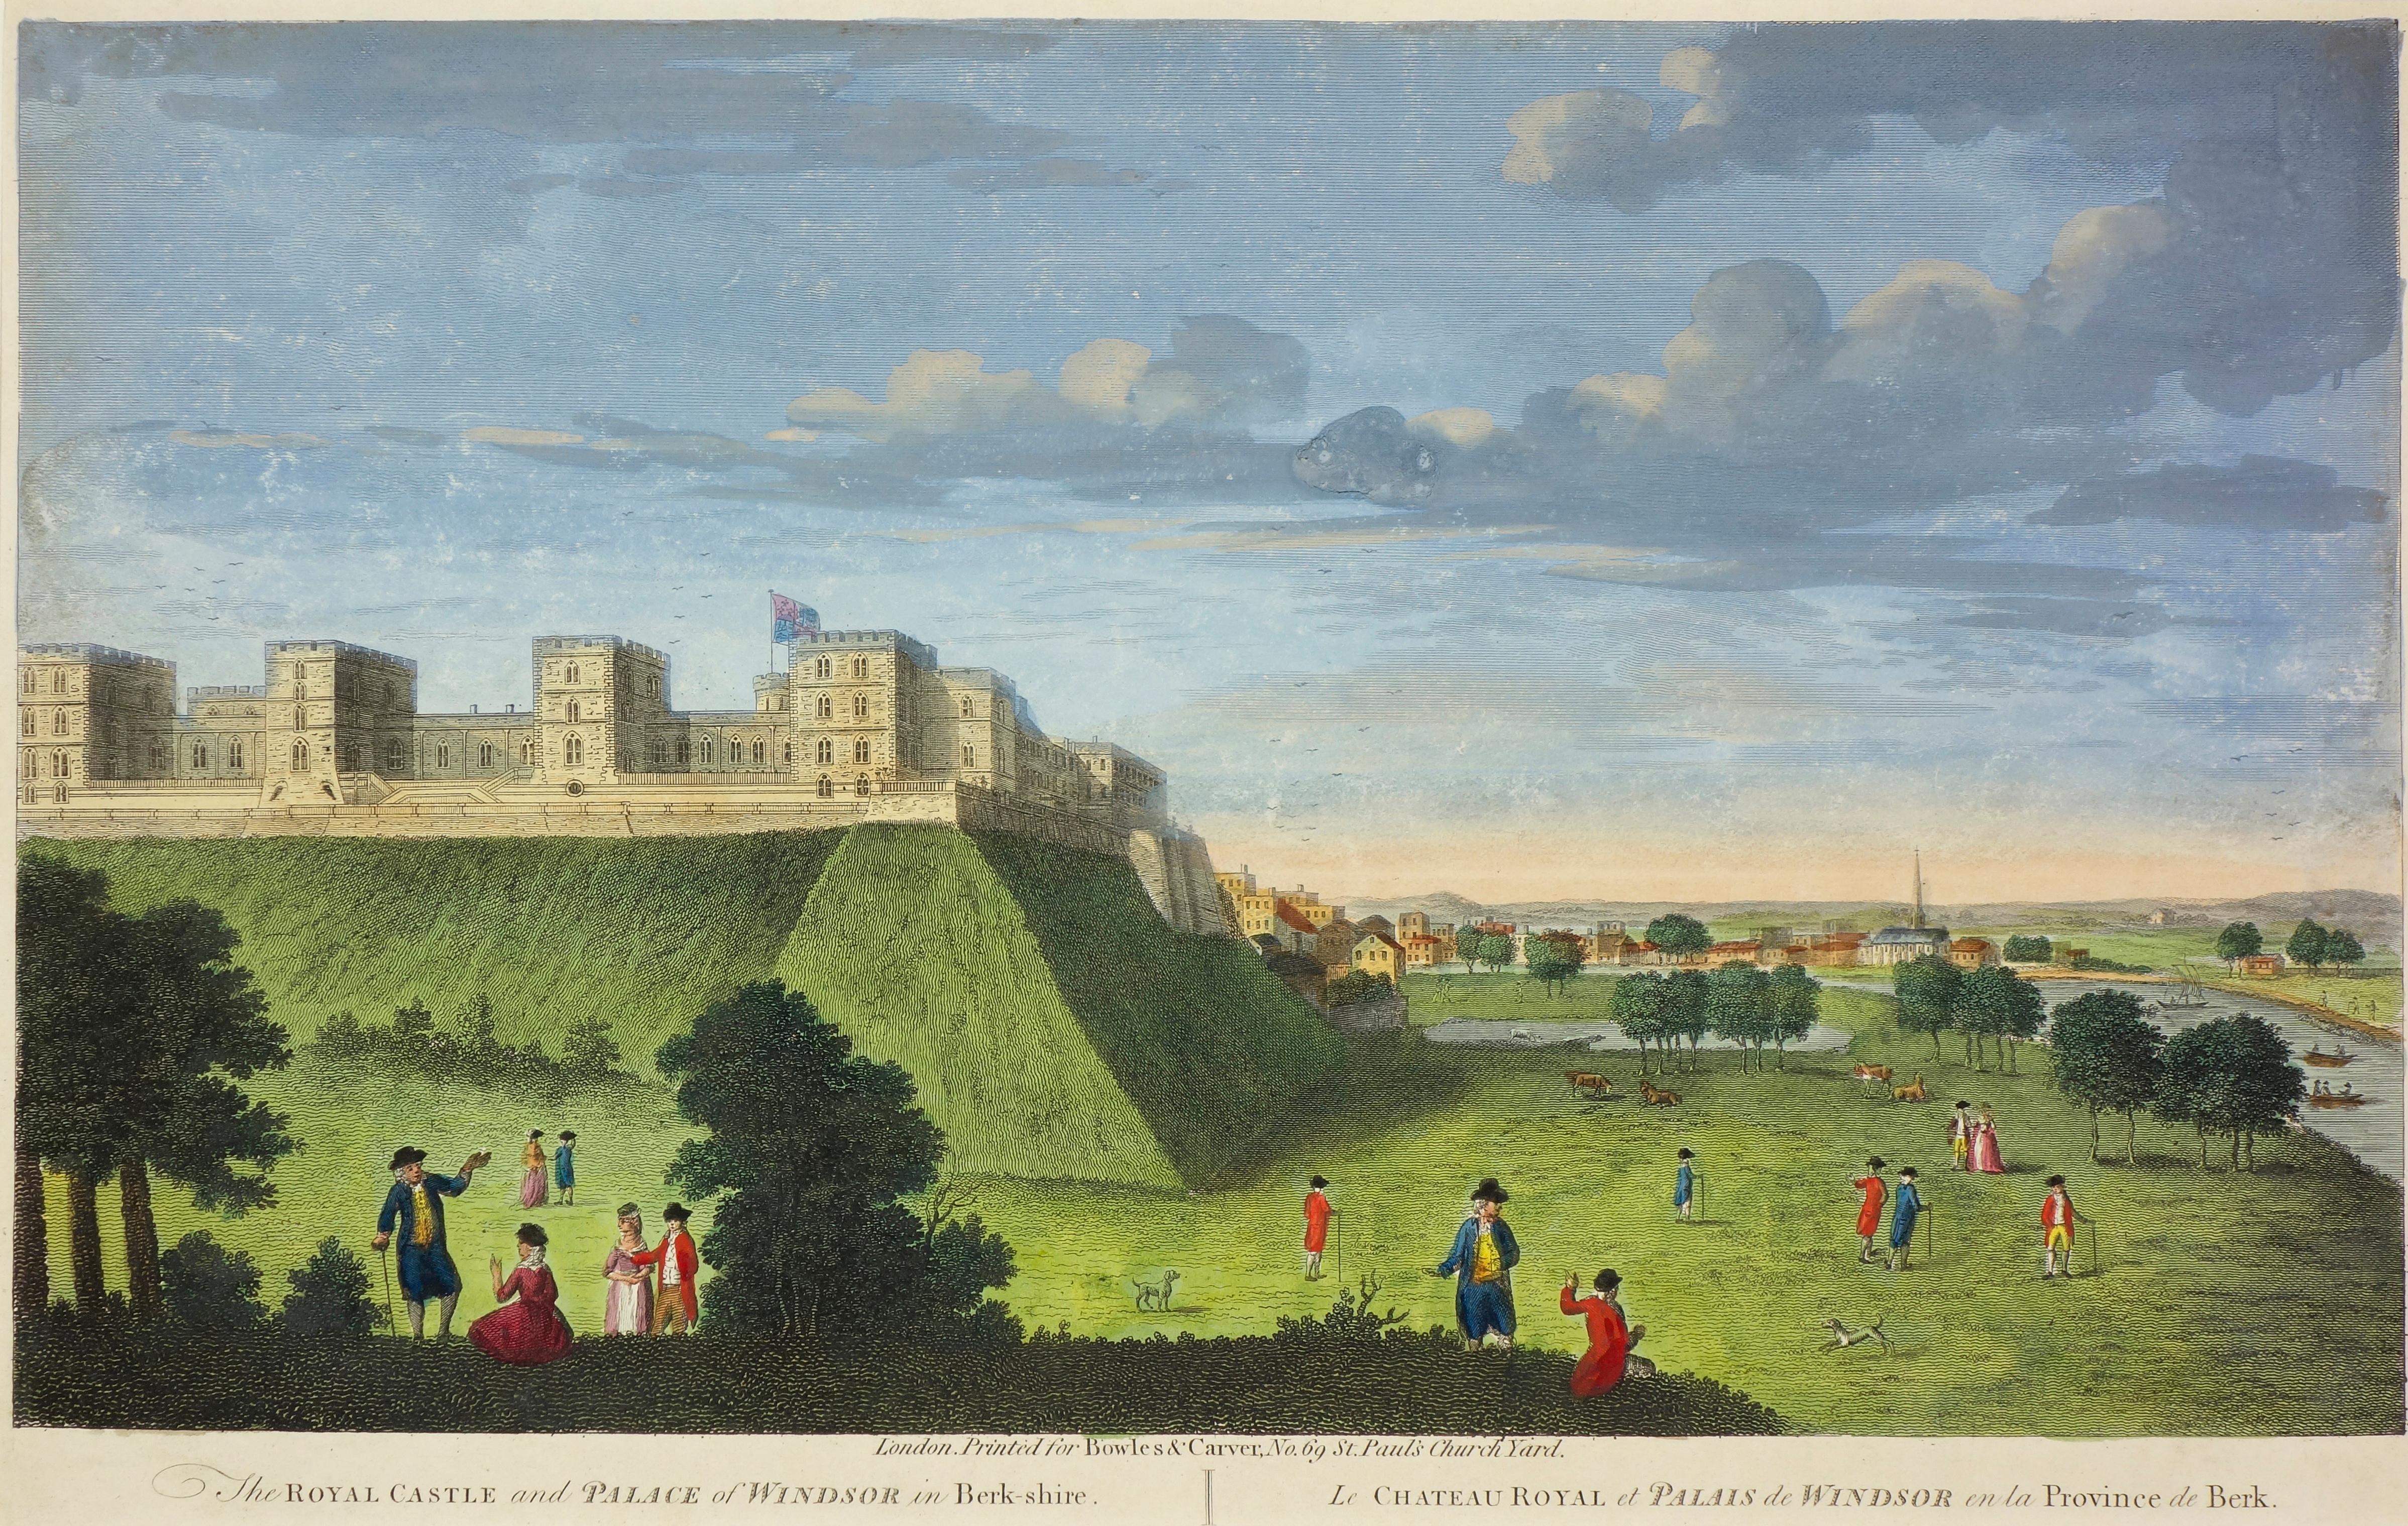 The Royal Castle and Palace of Windsor Original copper plate engraving - Print by Unknown